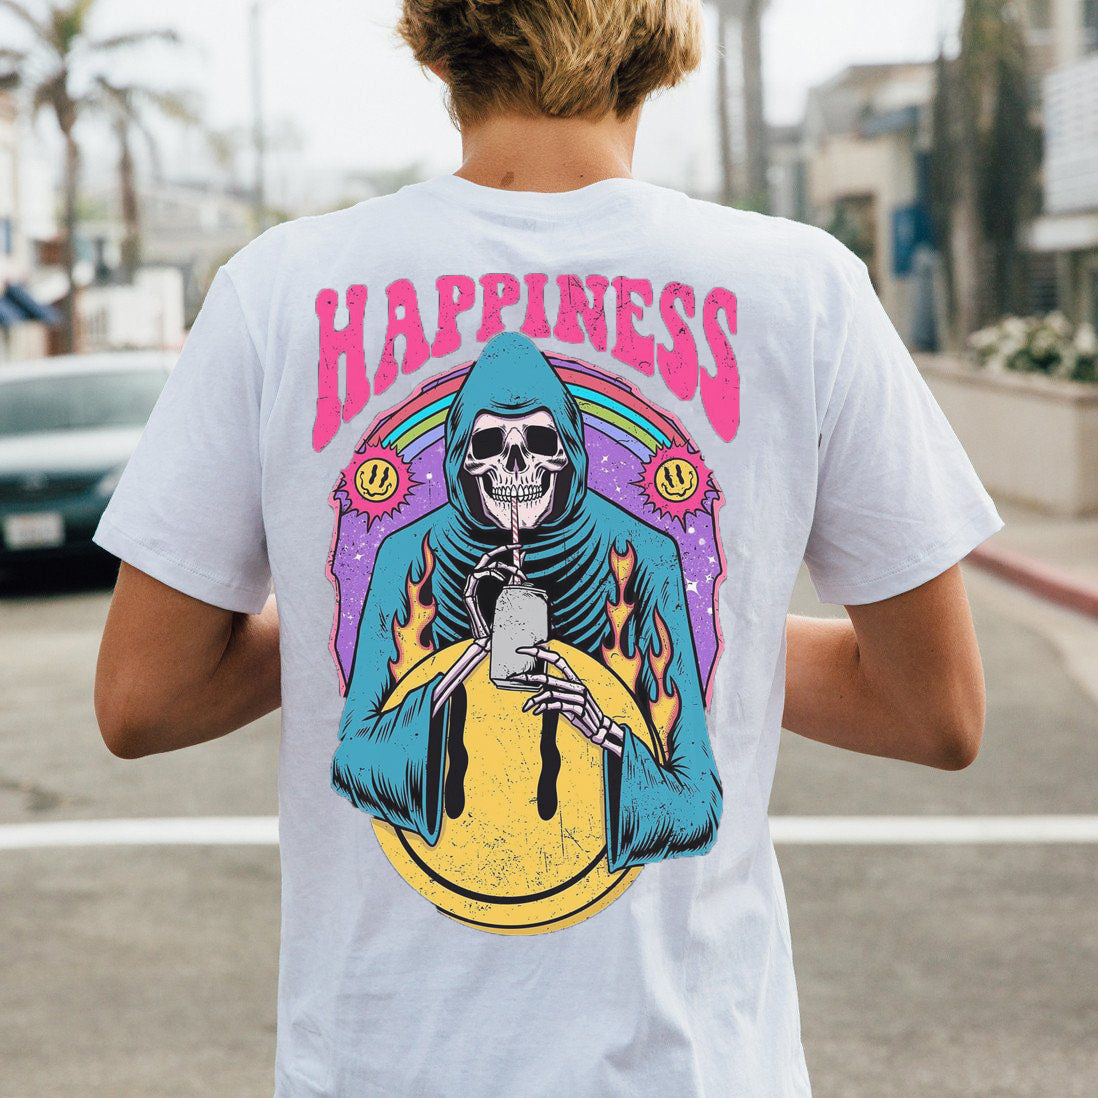 Tattoo inspired clothing: Happiness Hype Death T-shirt-Wawl Soul